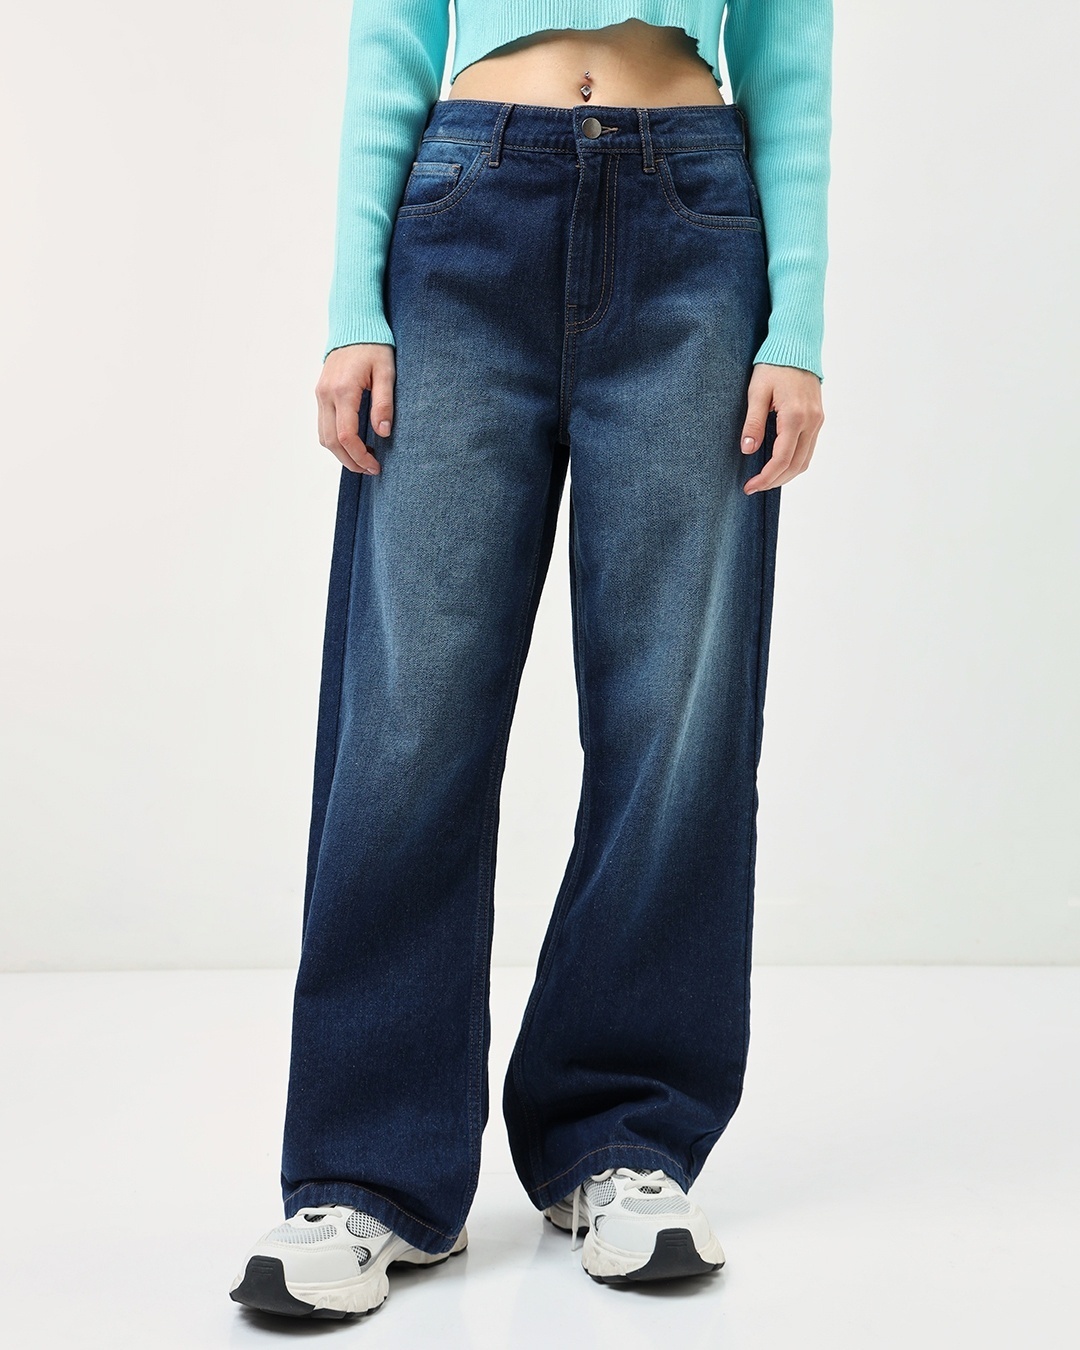 Cute Jeans For Women | Lime Lush Boutique | Lime Lush